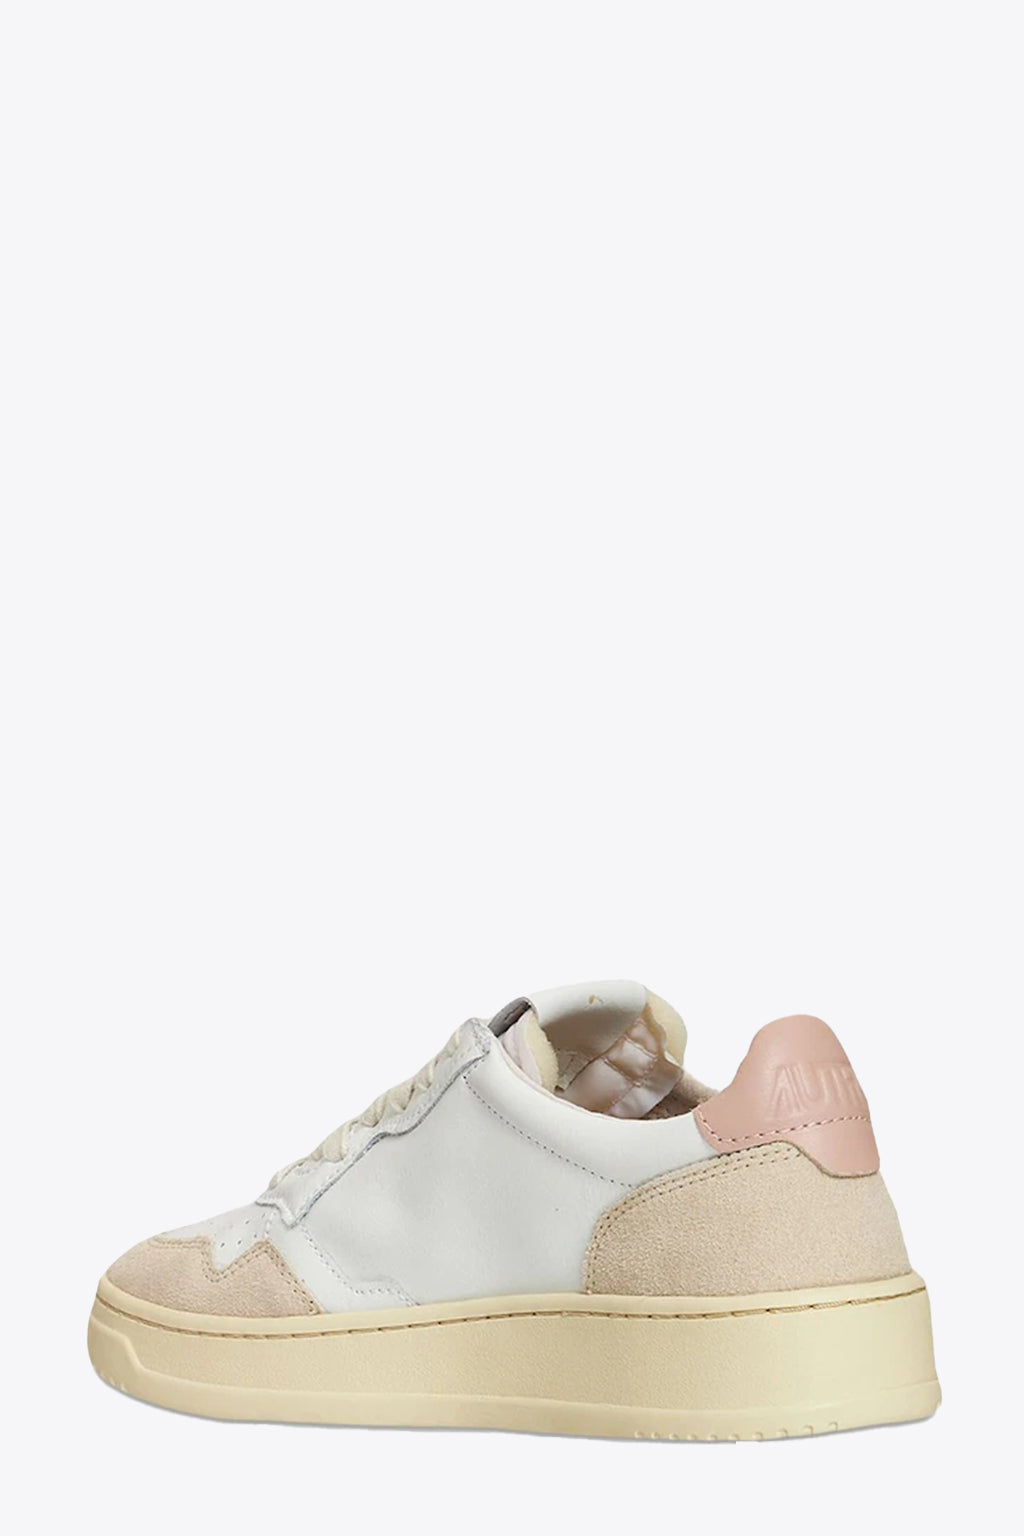 alt-image__White-leather-low-sneaker-with-pale-pink-back-tab---Medalist